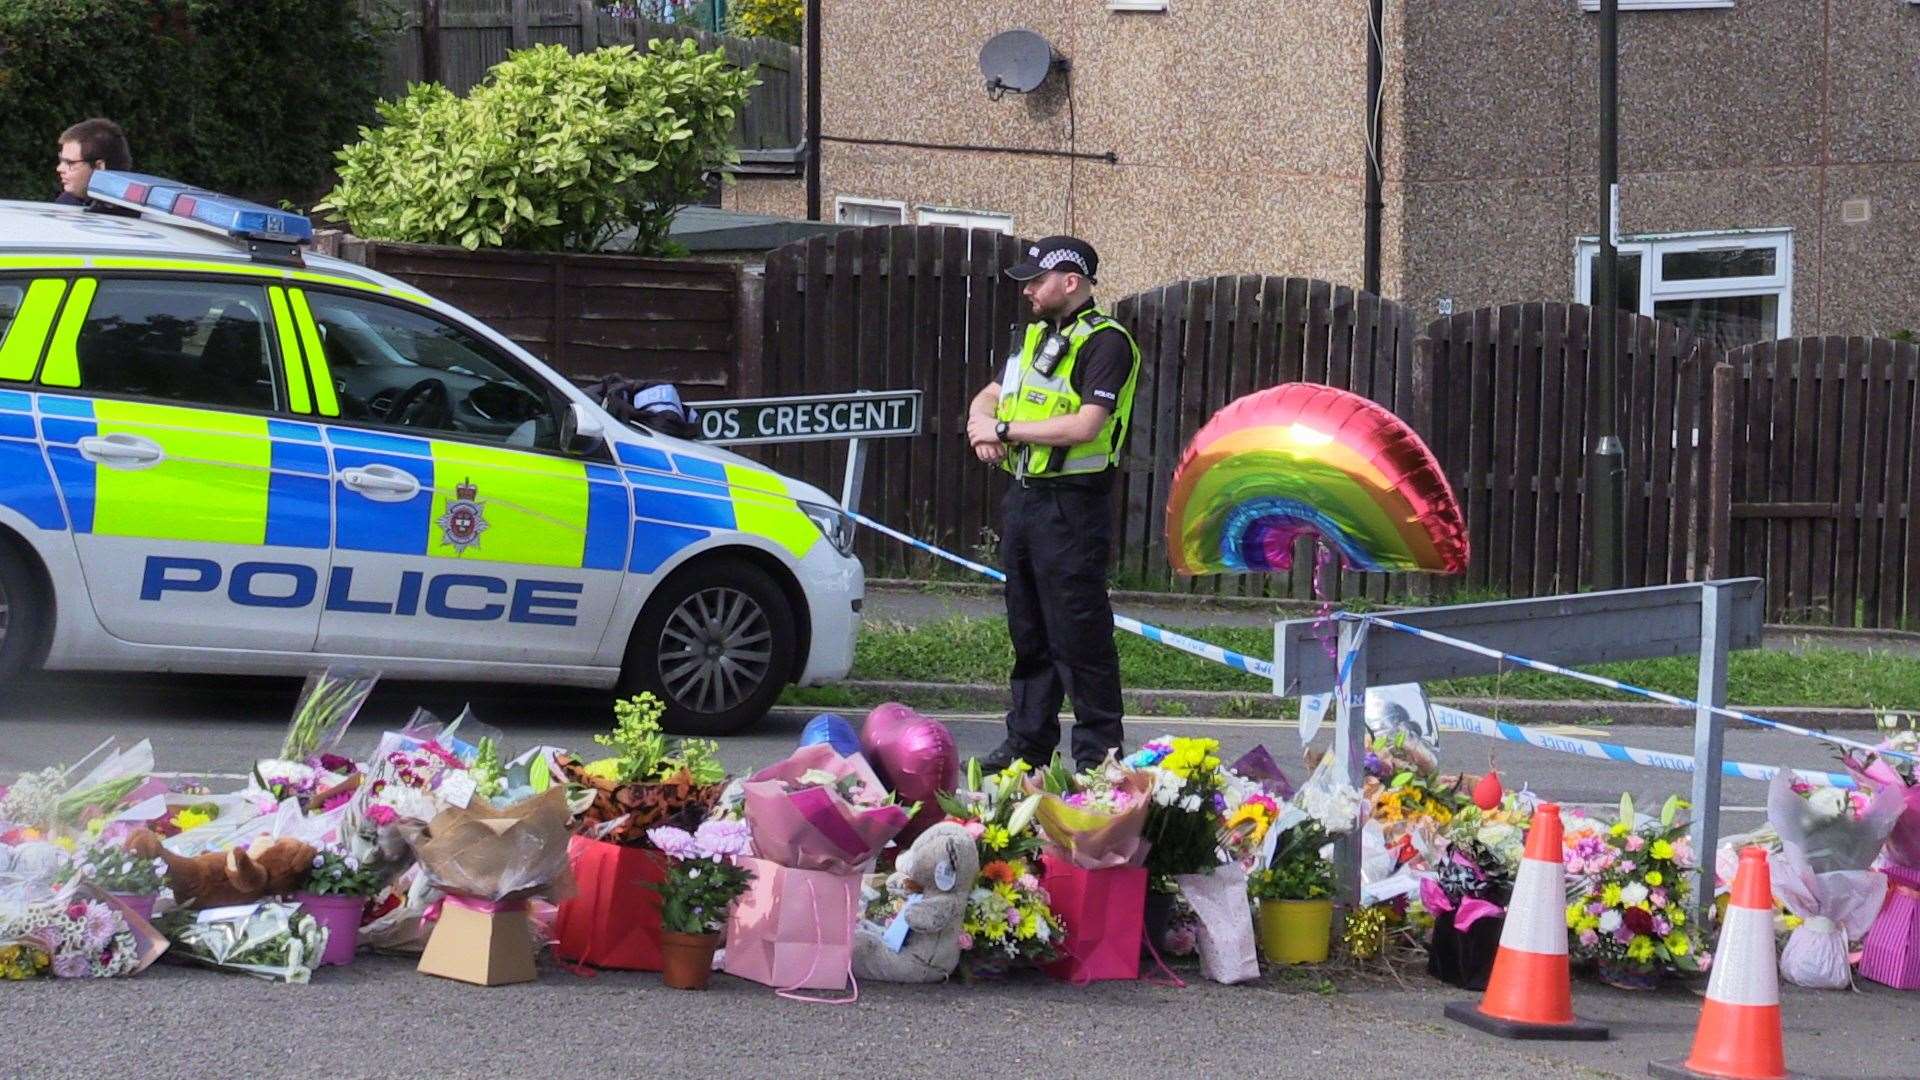 Flowers have been left near the scene in Chandos Crescent (Dave Higgens/PA)